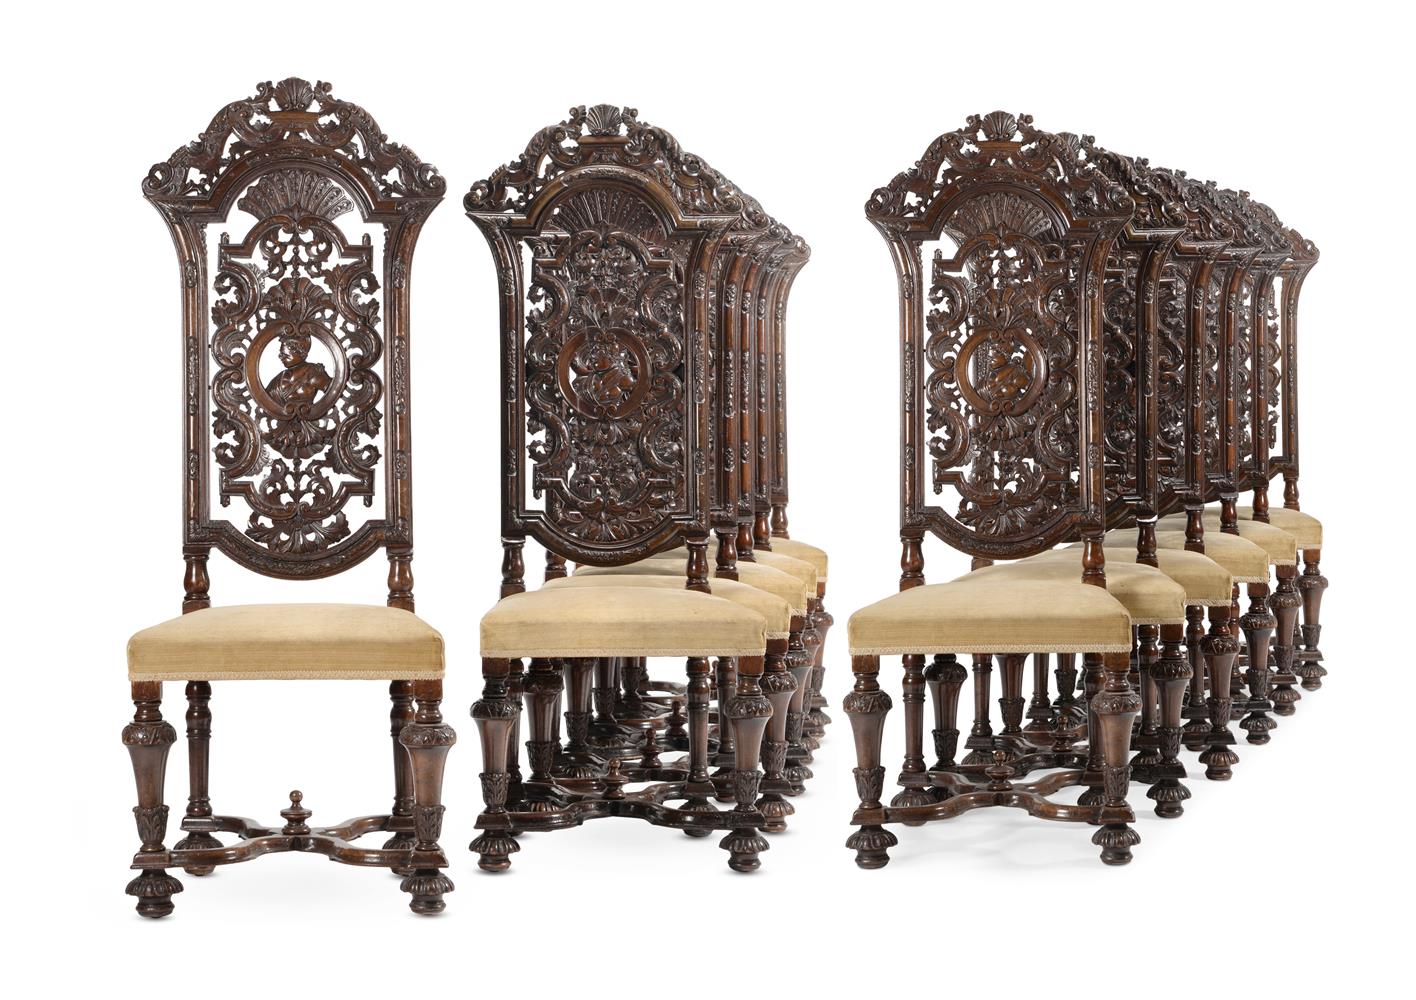 A SET OF TWELVE WALNUT CHAIRS, IN 17TH CENTURY STYLE, LATE 19TH/EARLY 20TH CENTURY